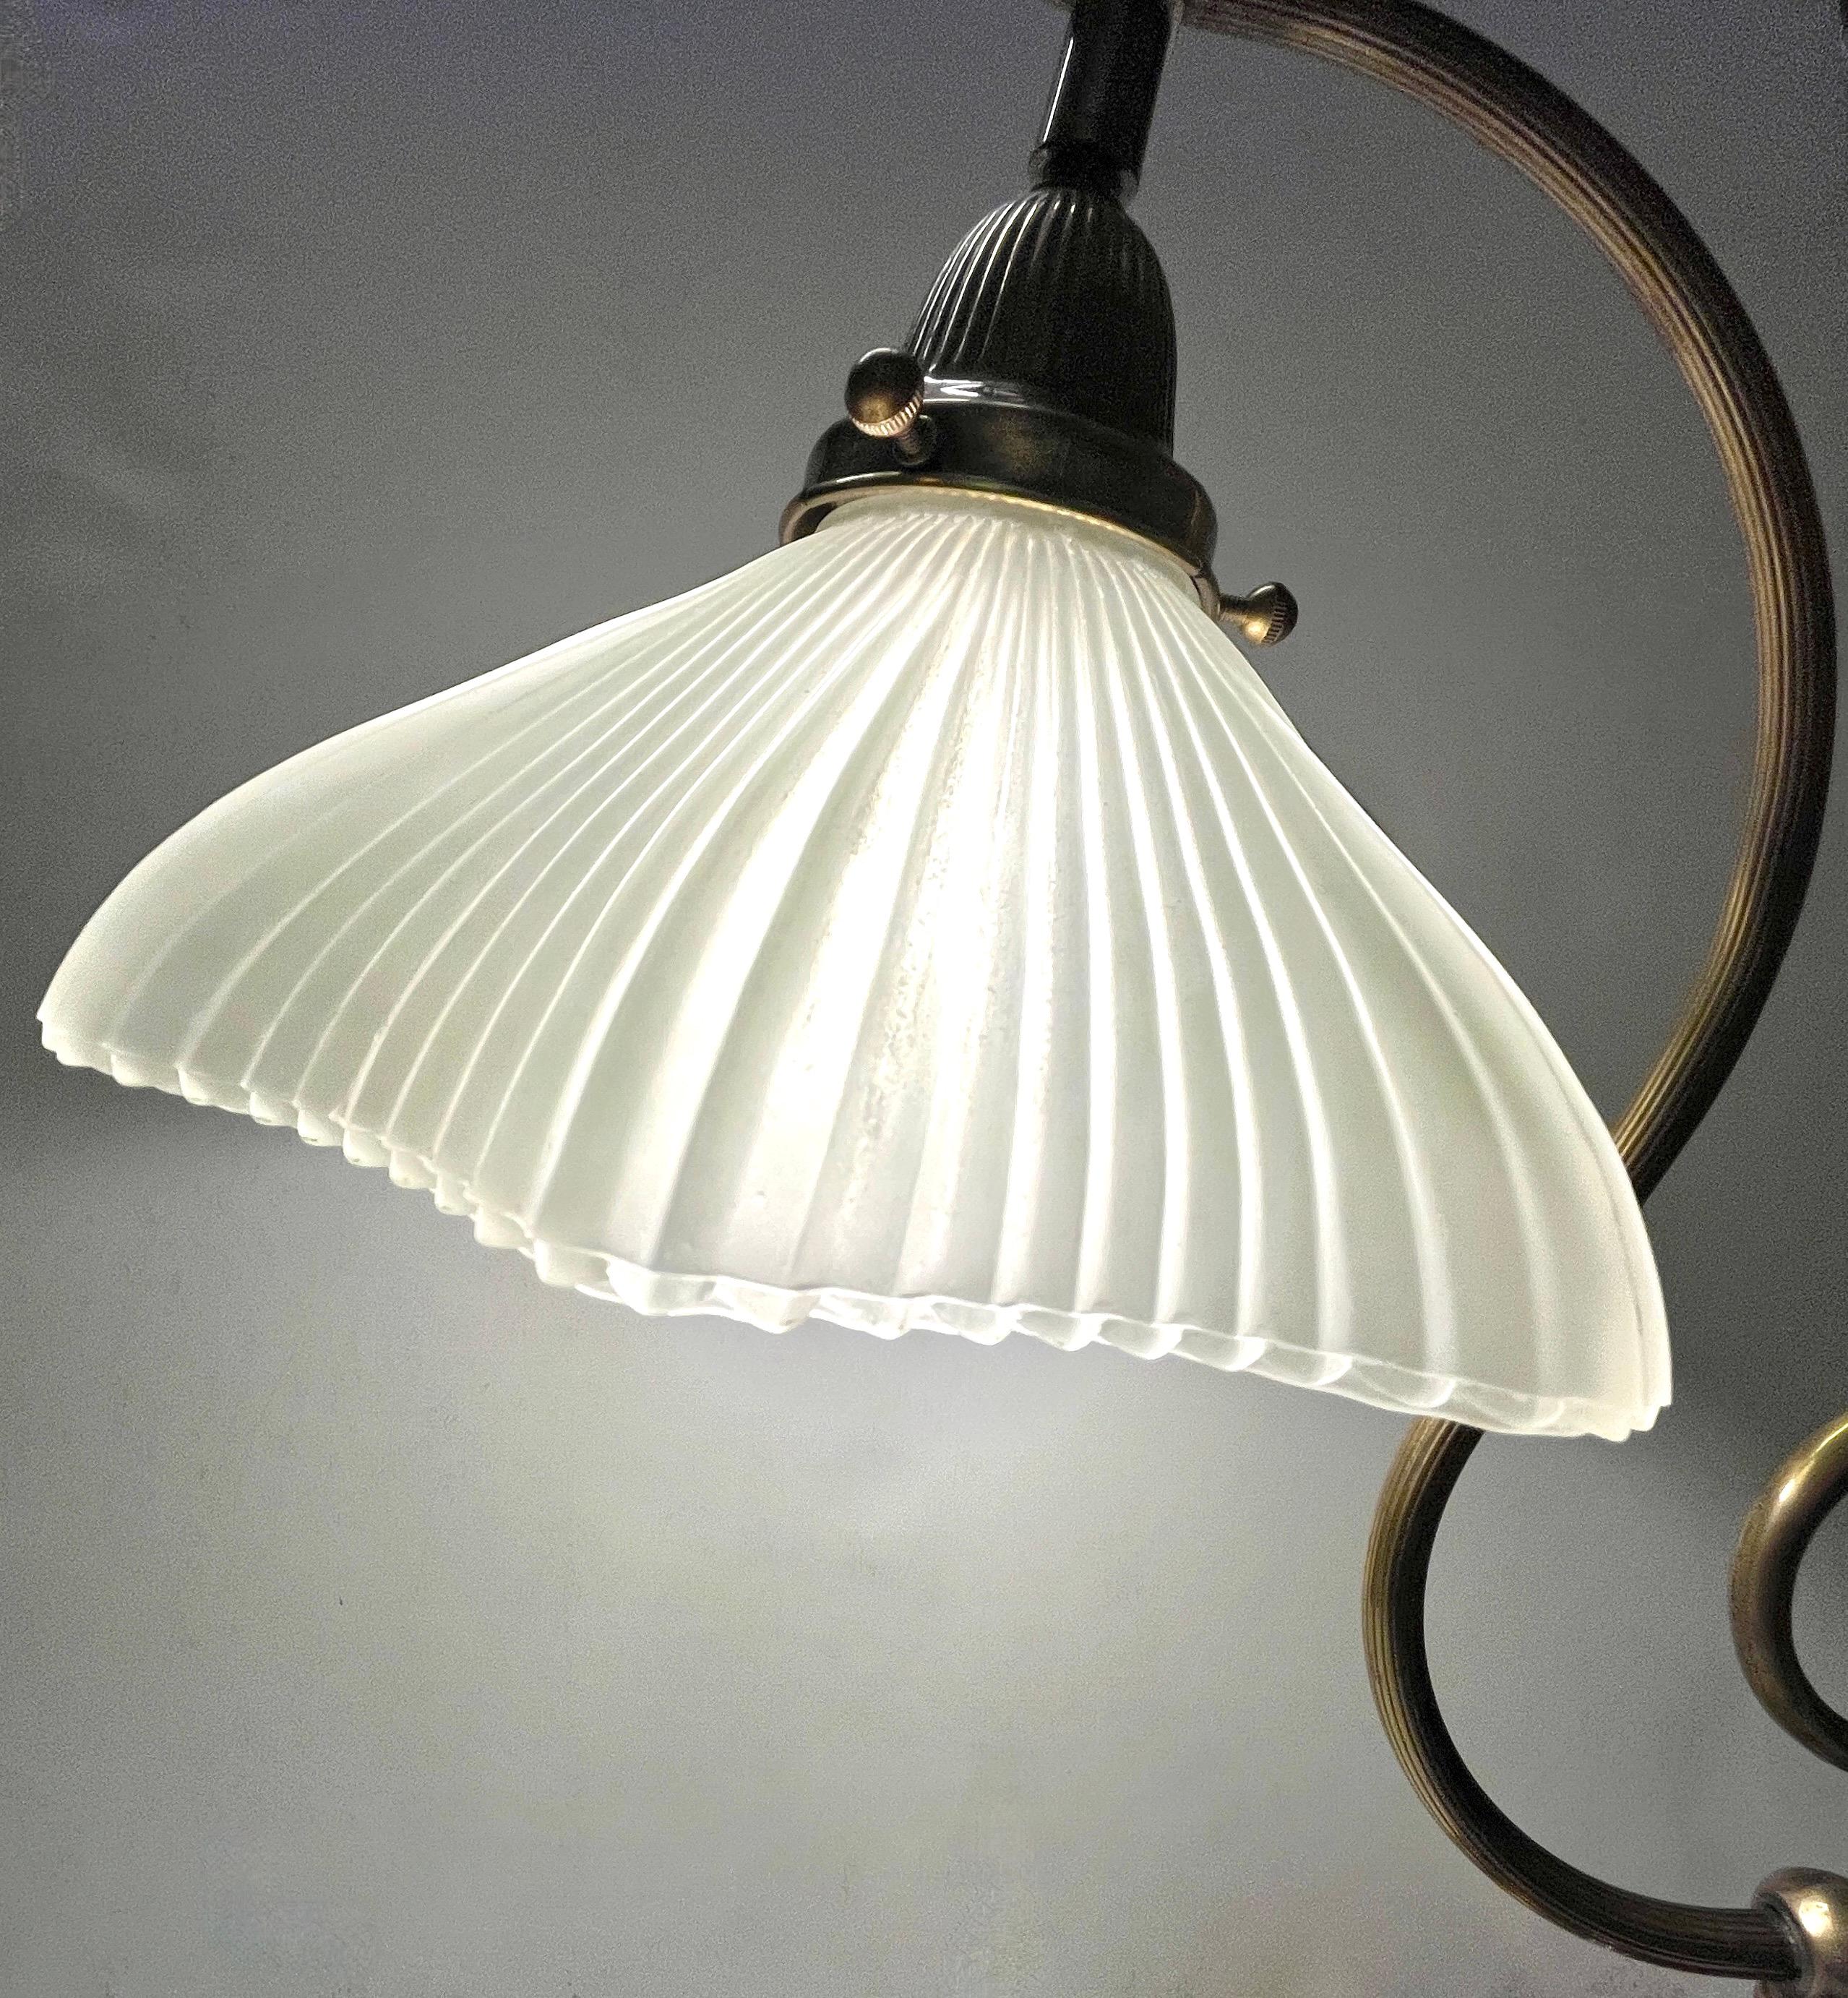 1950s American Art Deco Style Brass Table/Desk Lamp with Satin White Glass Shade For Sale 6